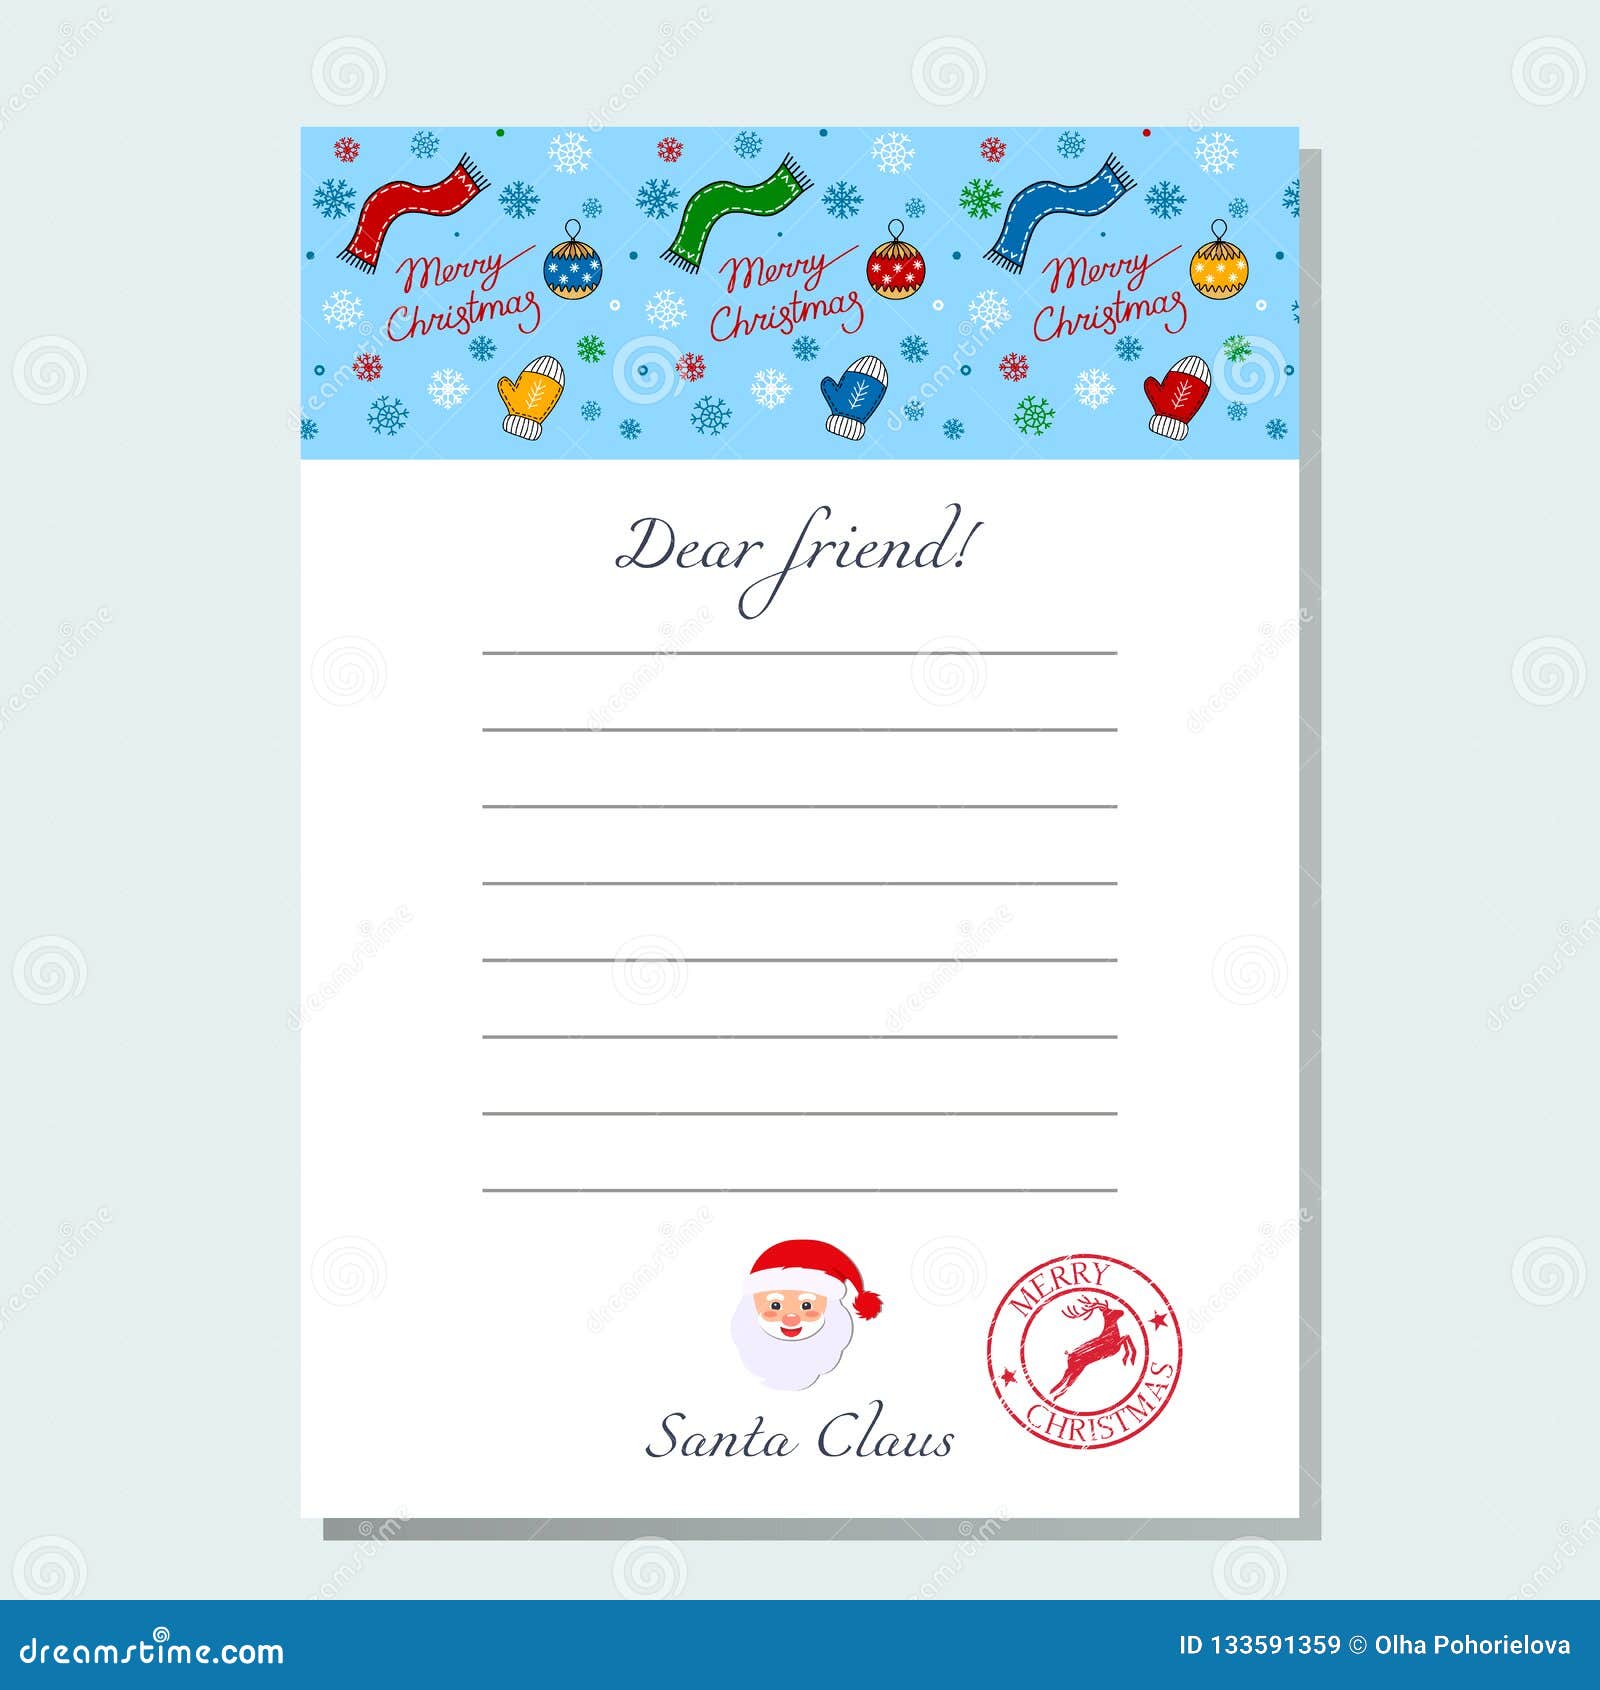 A Letter of Santa Claus on a Beautiful Letterhead - Template with Inside Santa Claus Letterhead Template